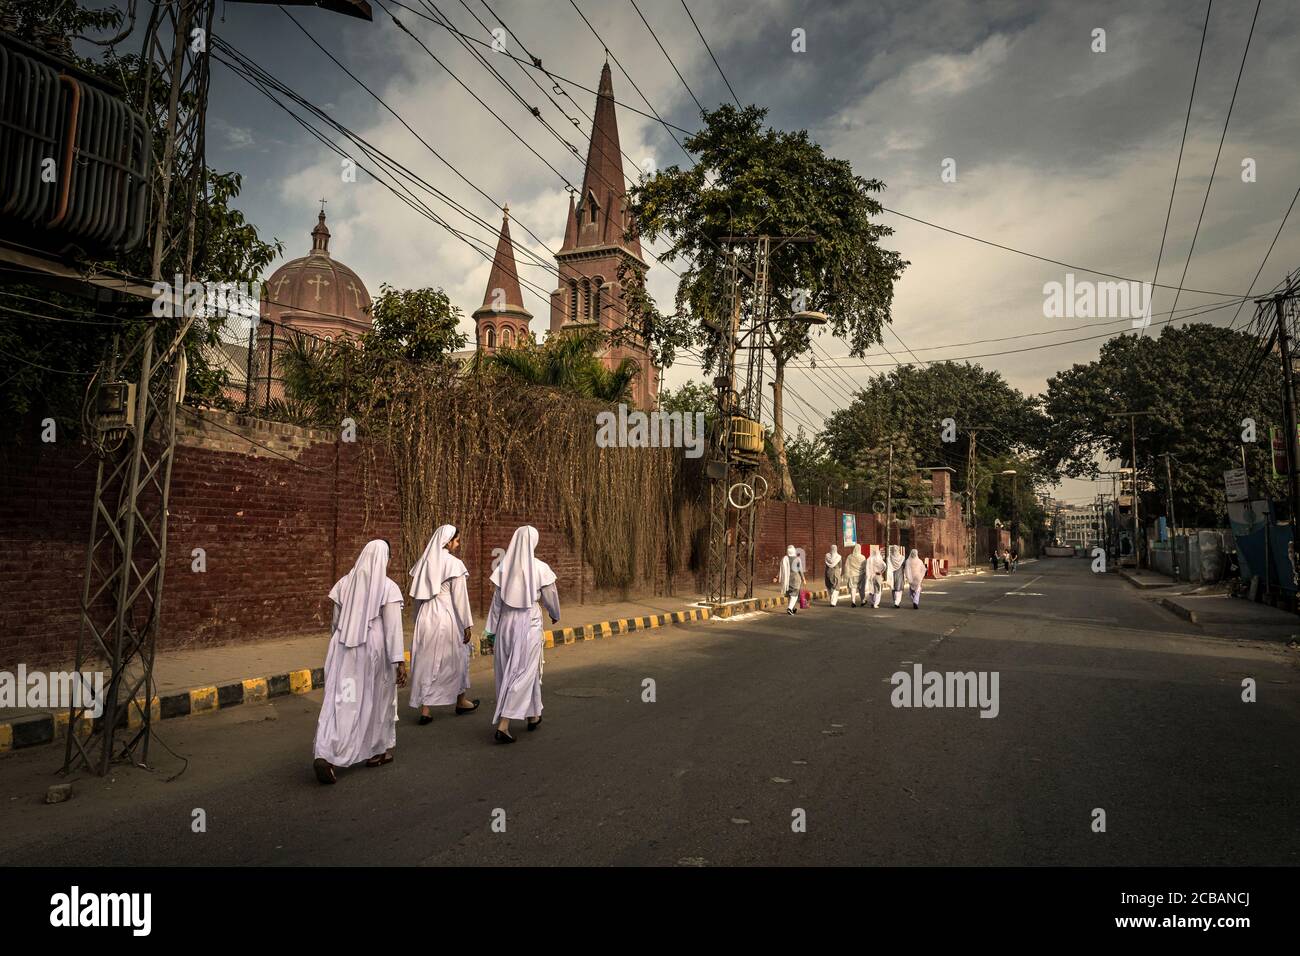 Nuns on their way to Sunday service in the Sacred Heart Cathedral in Lahore in Pakistan. For safety reasons and impending attacks, the roads in the area are closed. Stock Photo